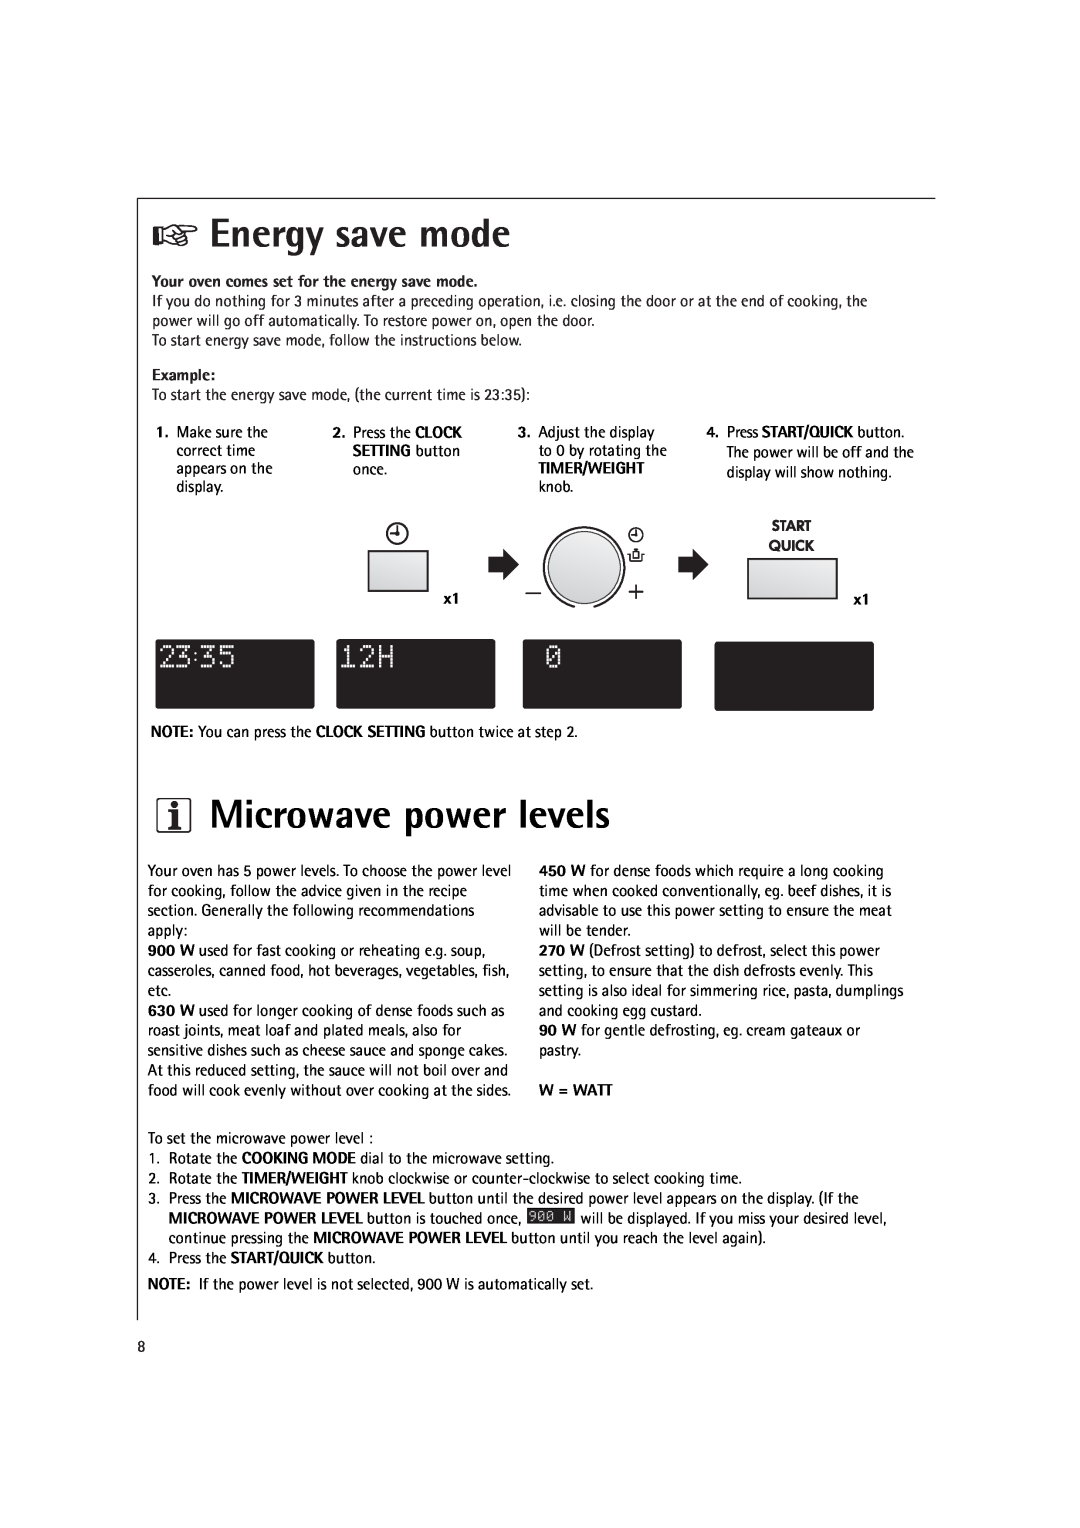 Electrolux MCC4060E Energy save mode, Microwave power levels, Your oven comes set for the energy save mode, Example 